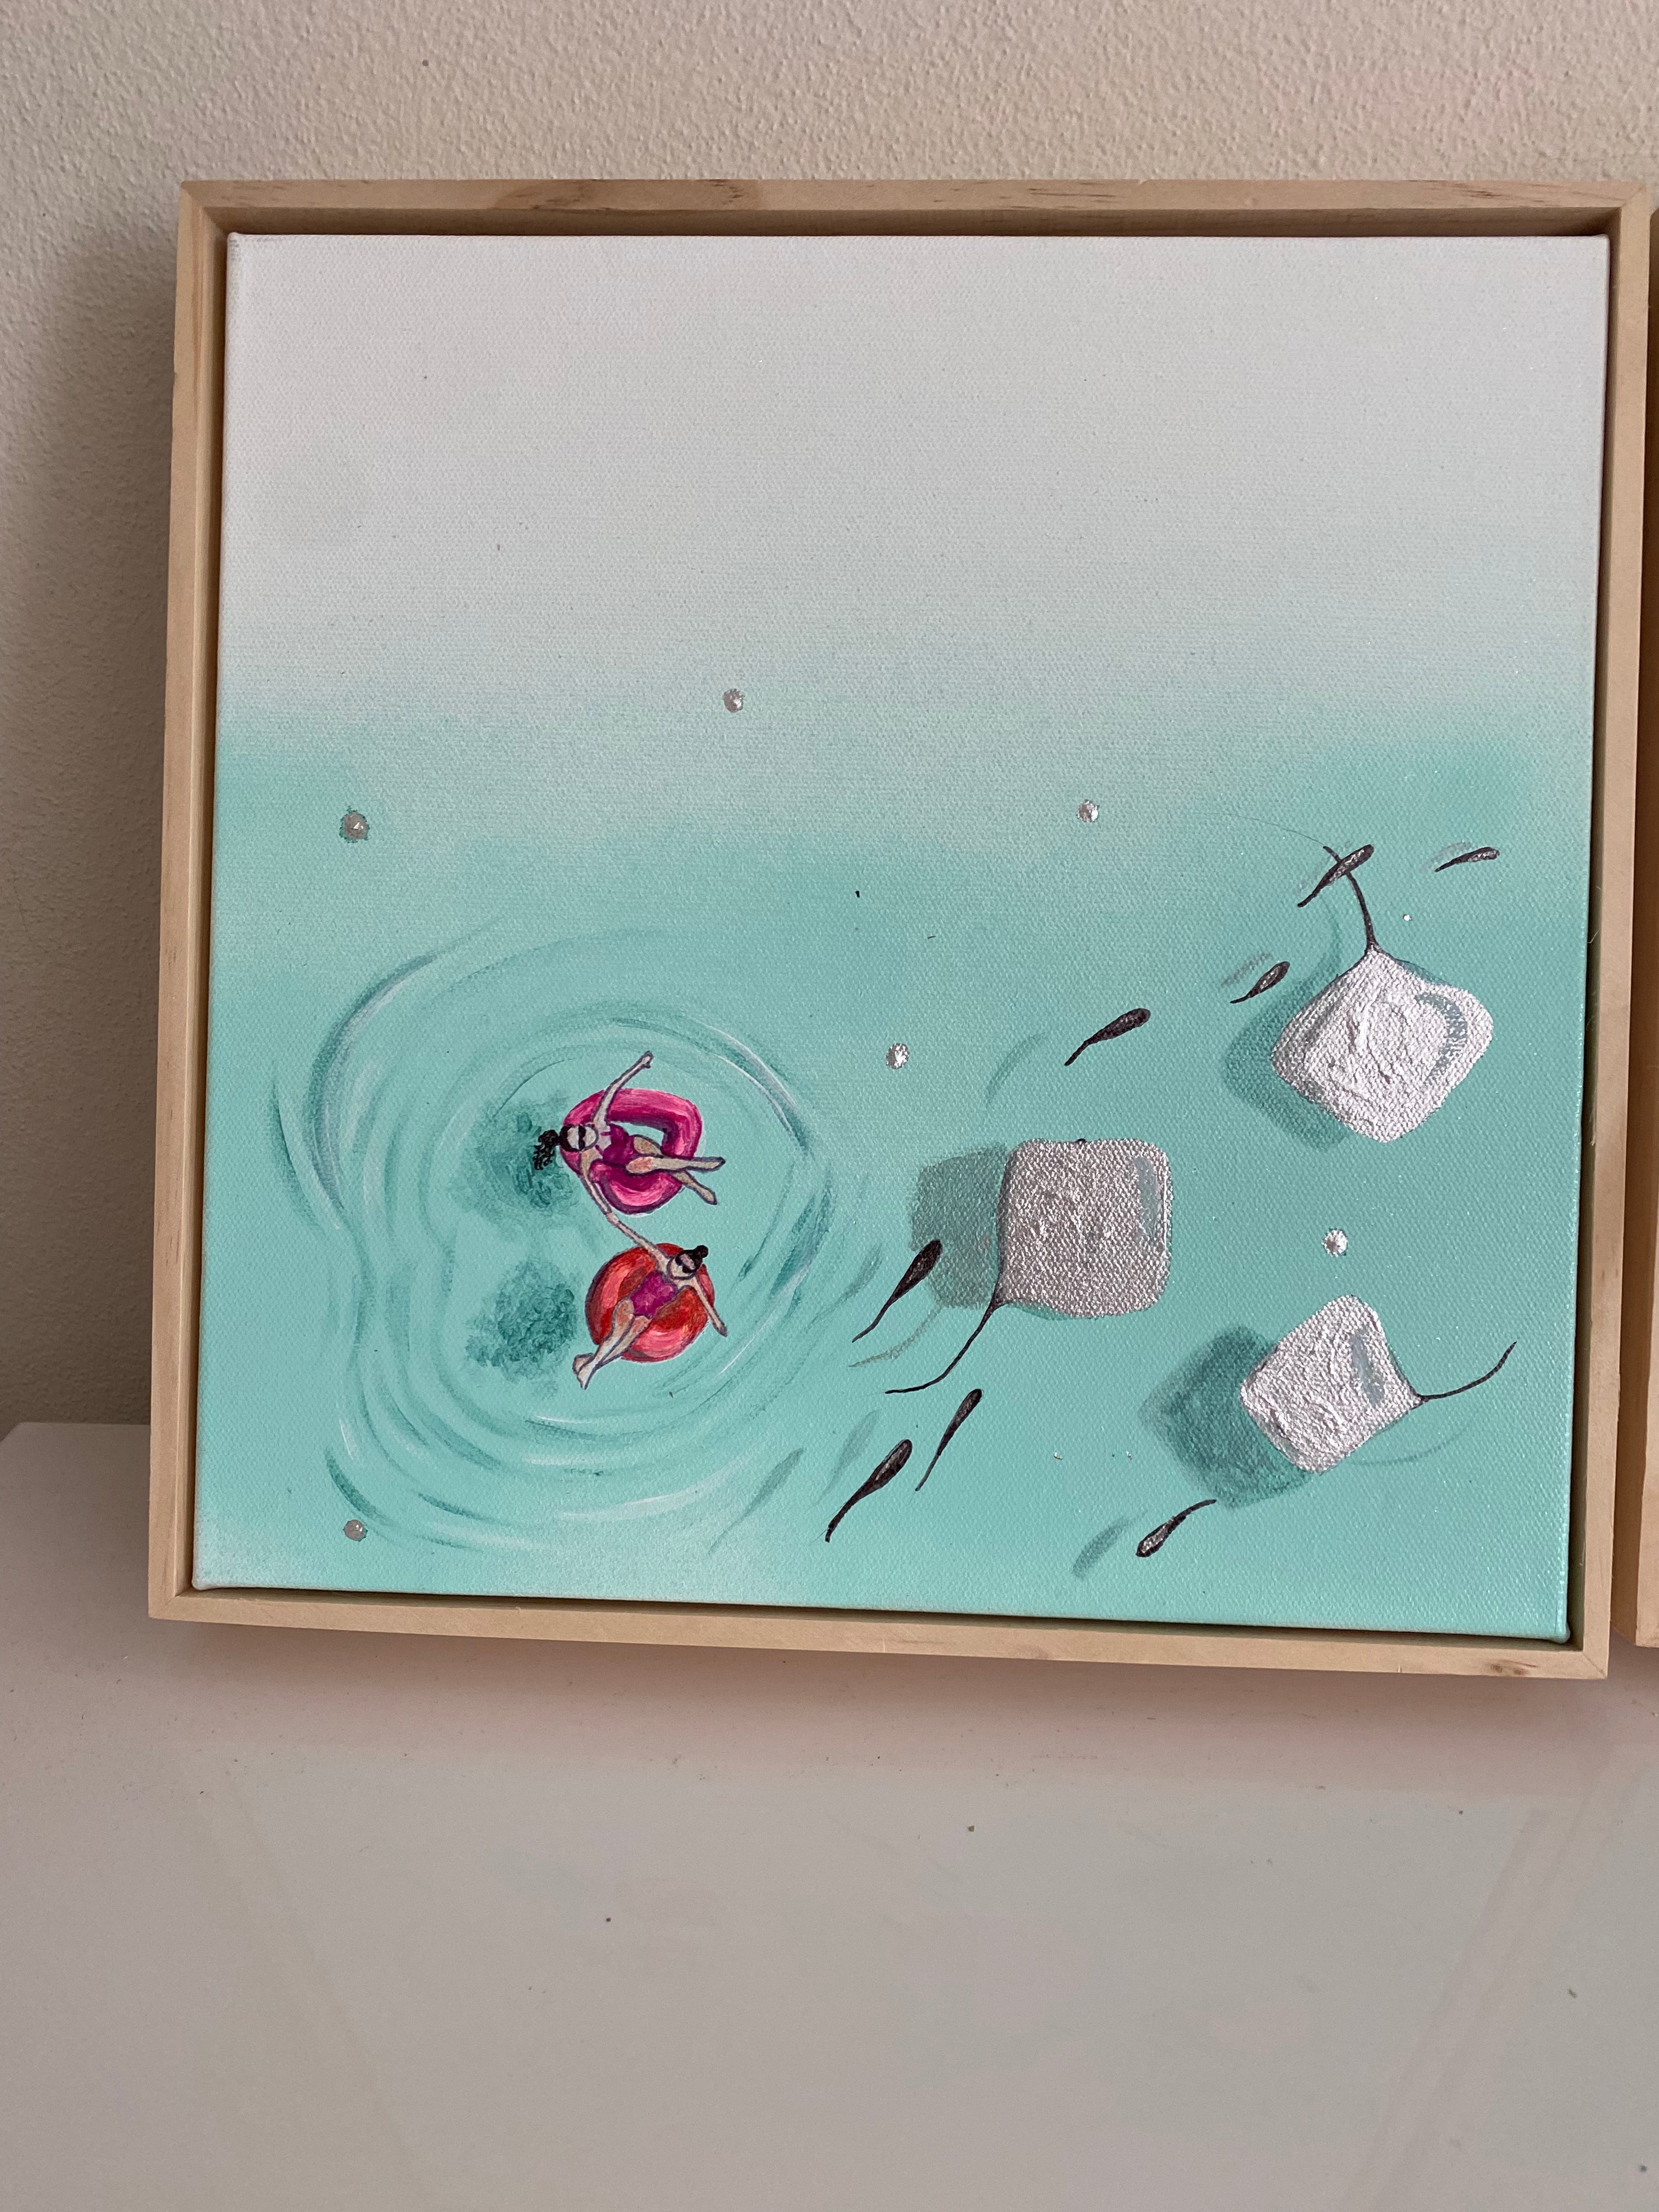 I just wanna be - Maldives - Sting rays - Ocean Mini Artwork - Mothers Day Gift